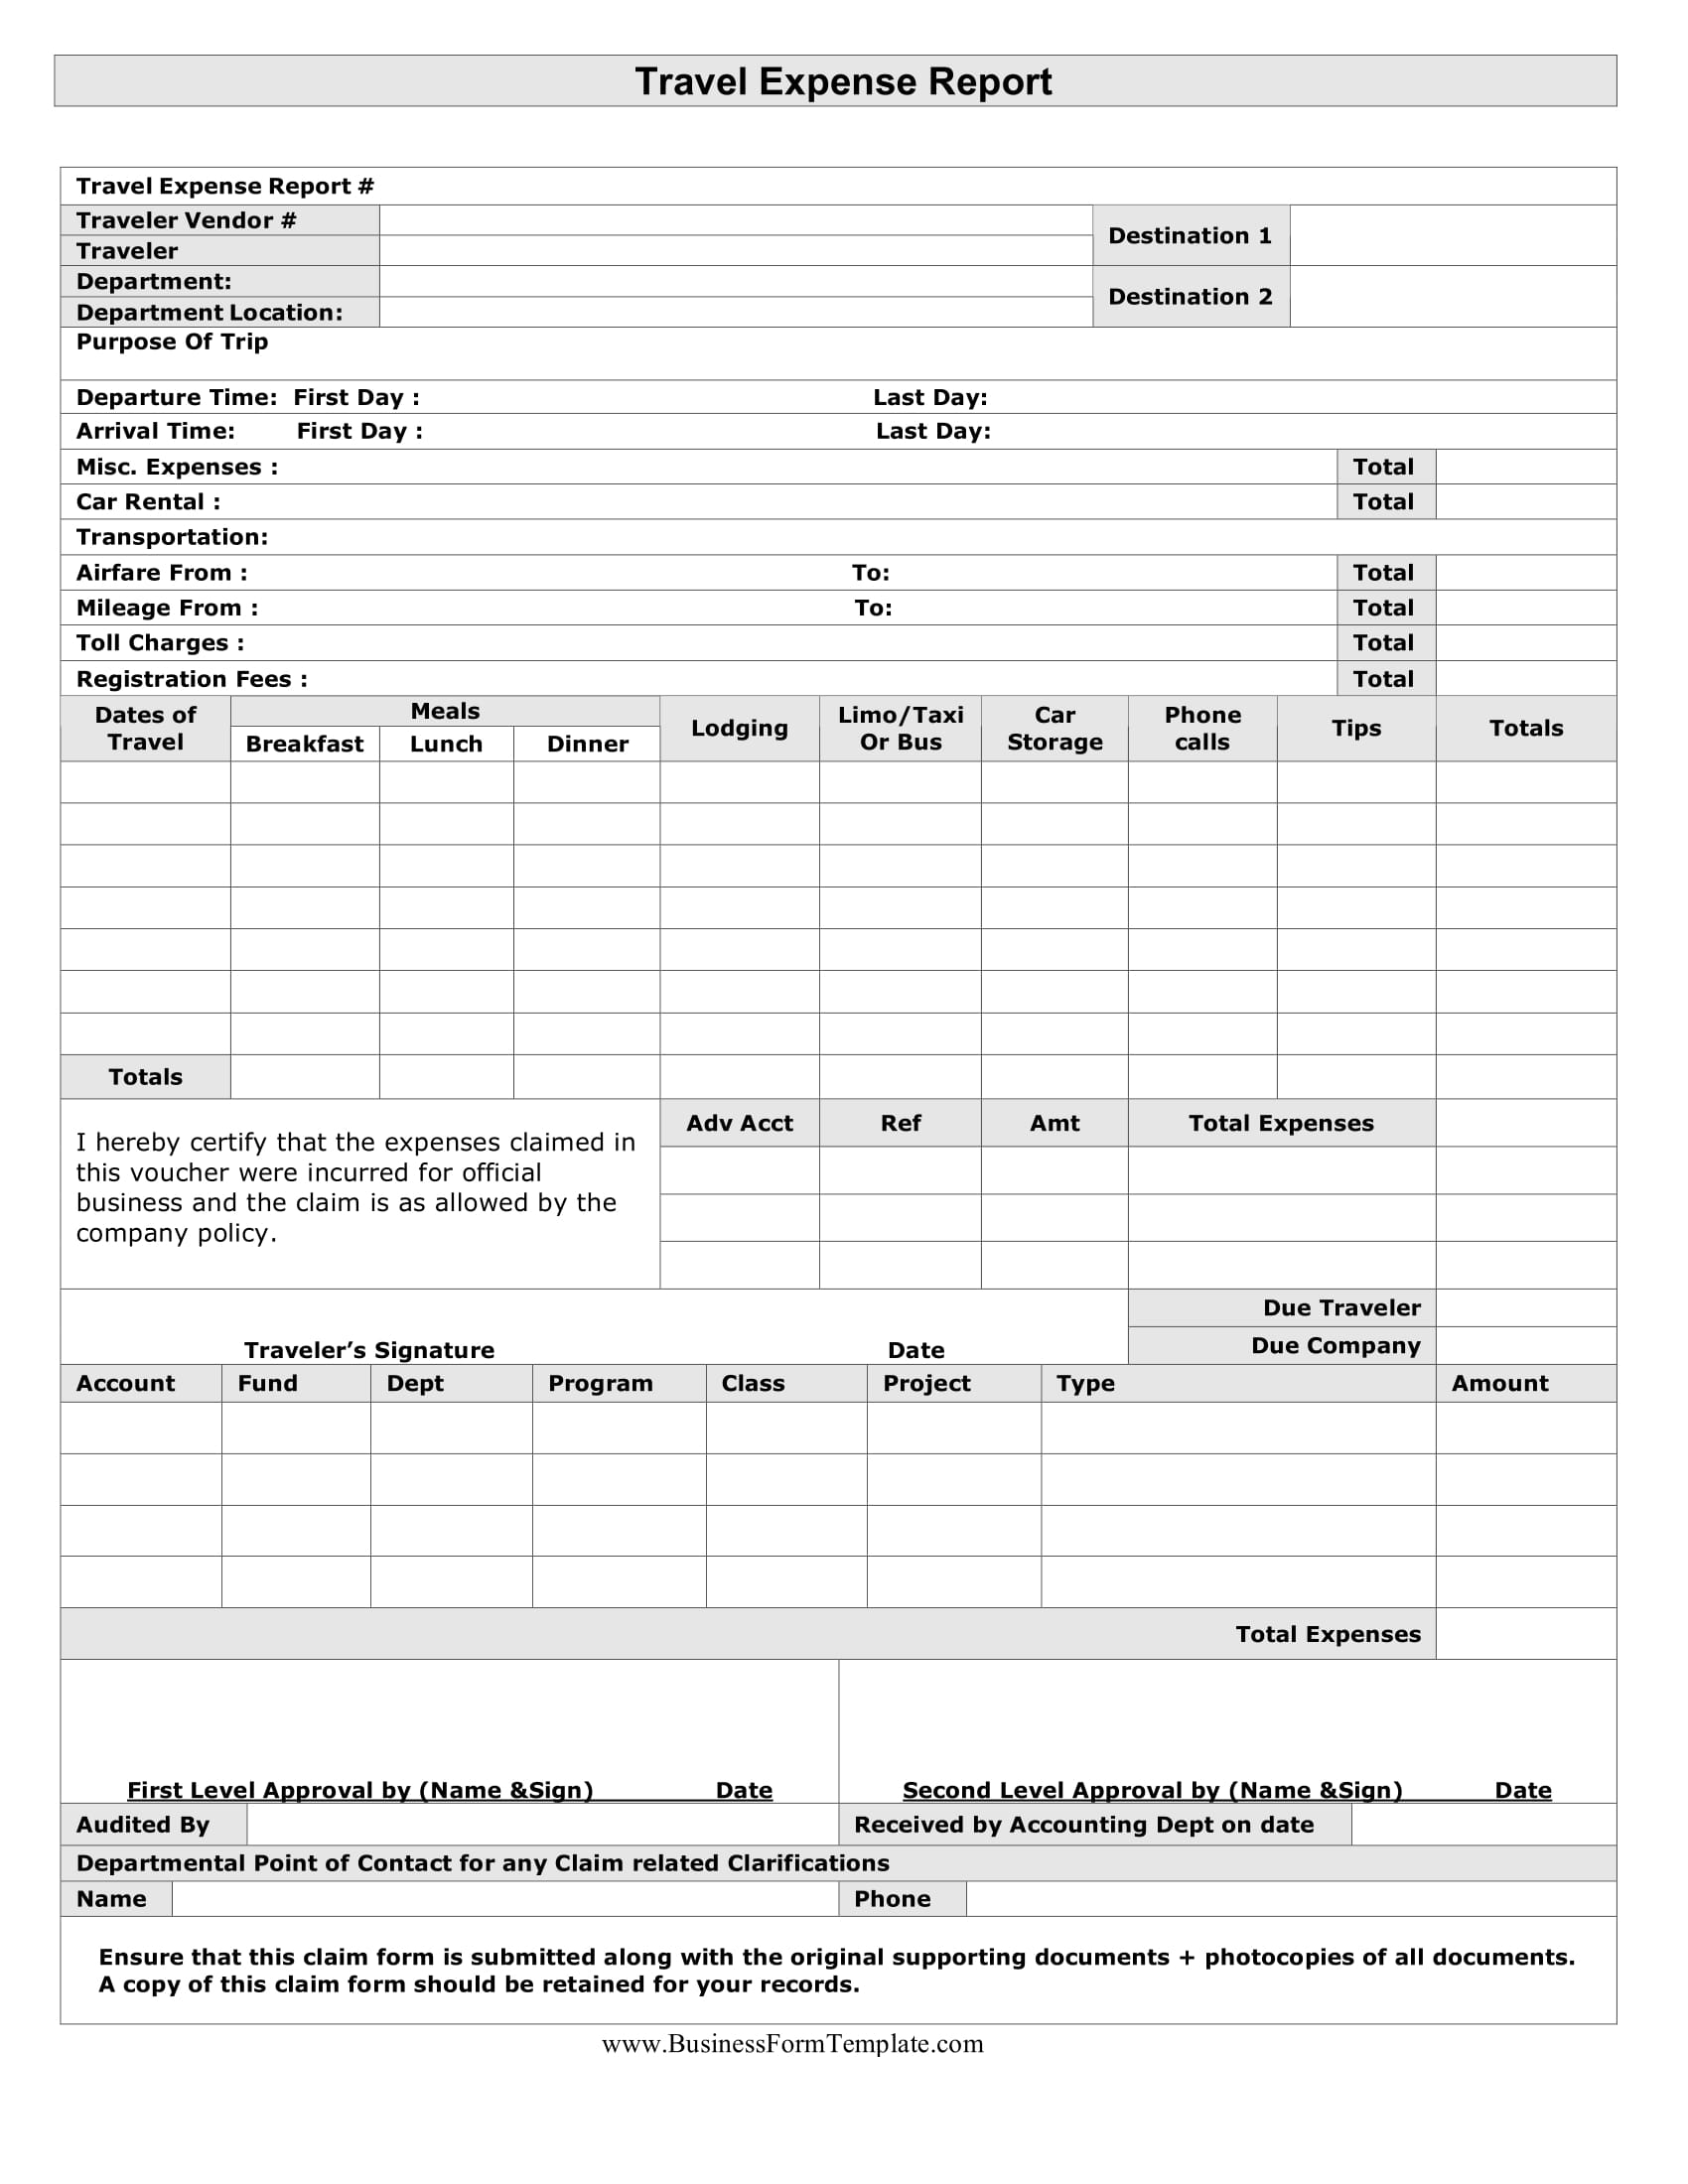 travel expense report form 1